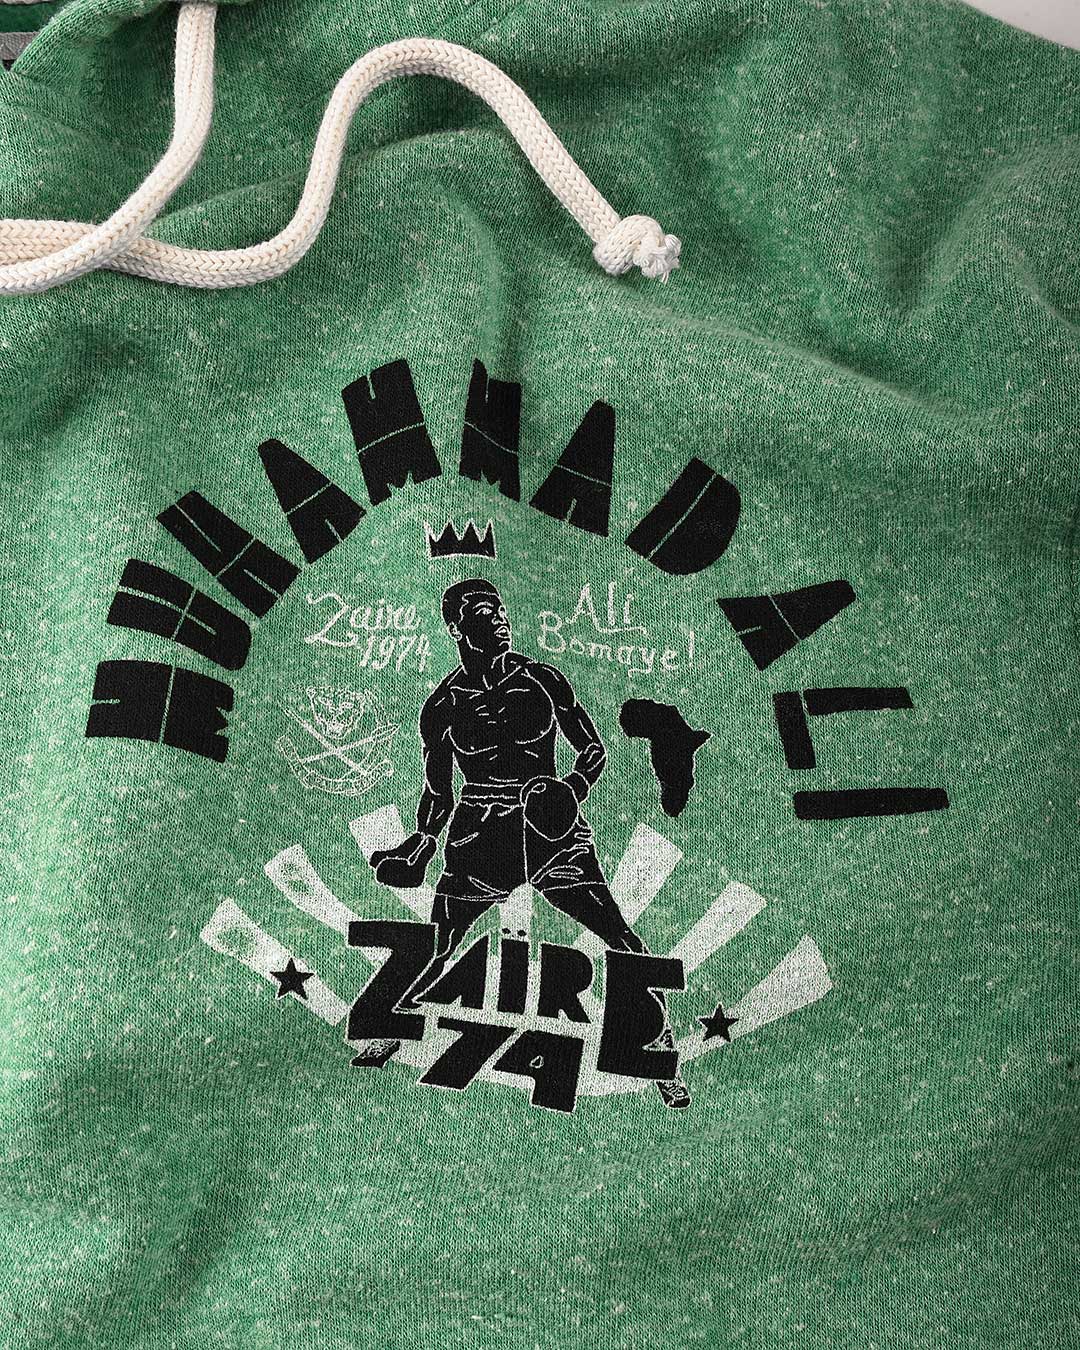 Ali Rumble Zaire 74 Green PO Hoody - Roots of Fight